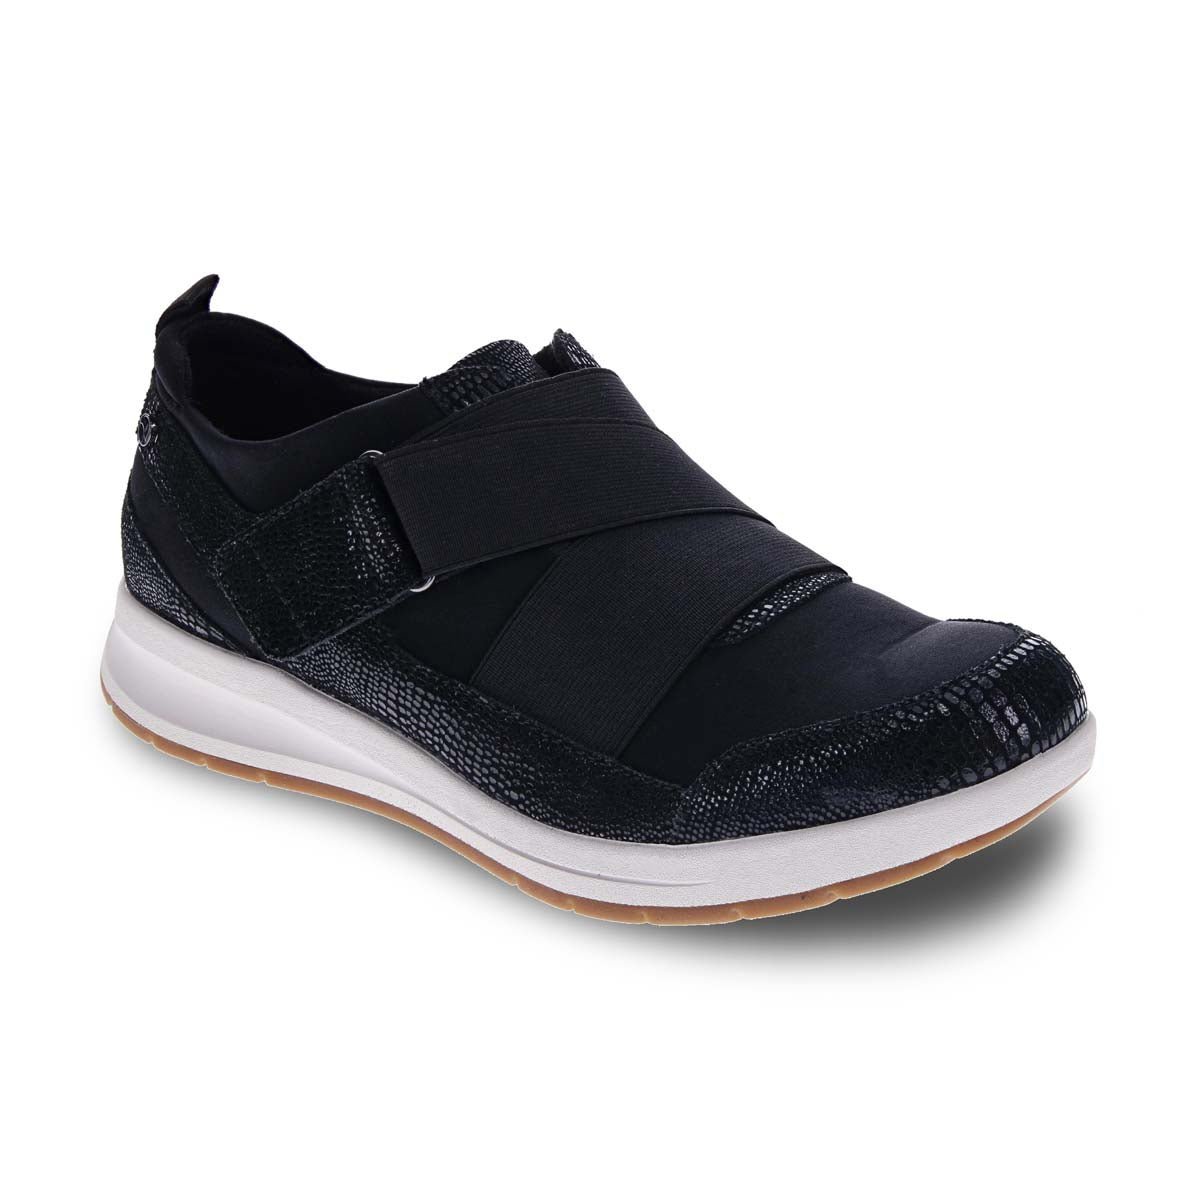 Revere Virginia Women's Athletic In Black - TLW Shoes